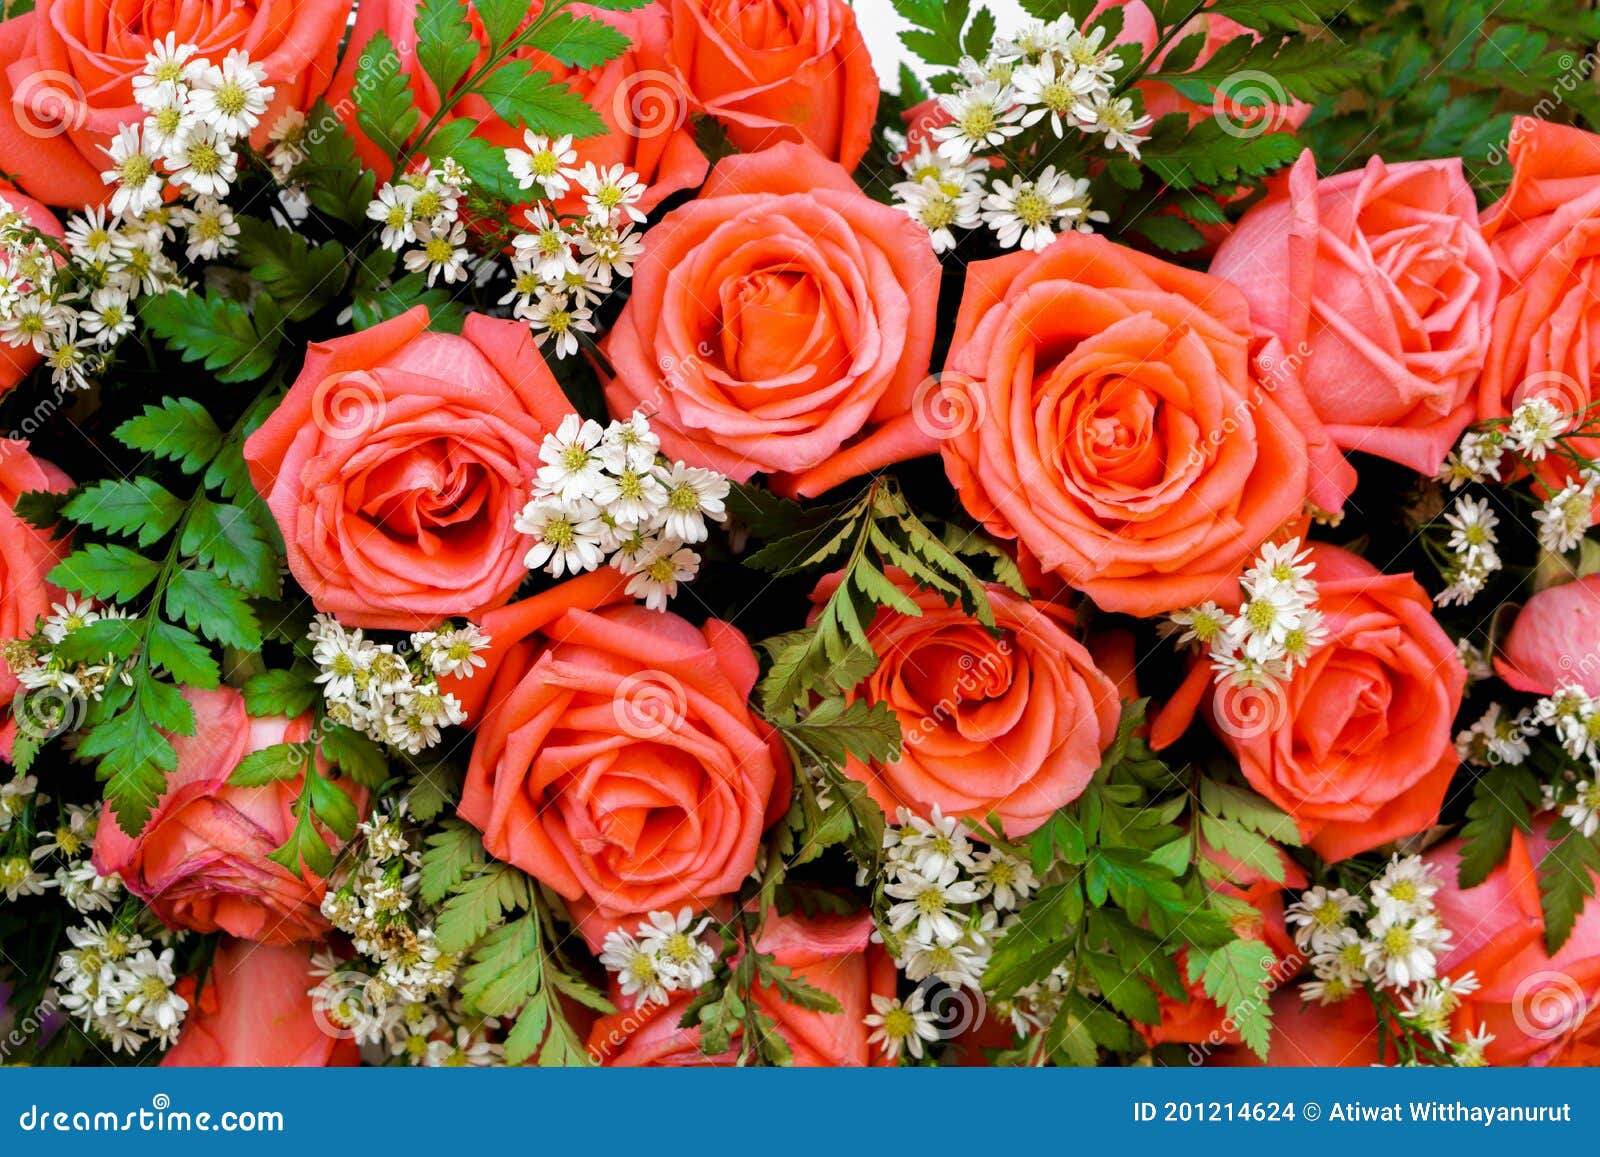 Top View of Wedding Pink Roses Flower Bouquet Stock Photo - Image of ...